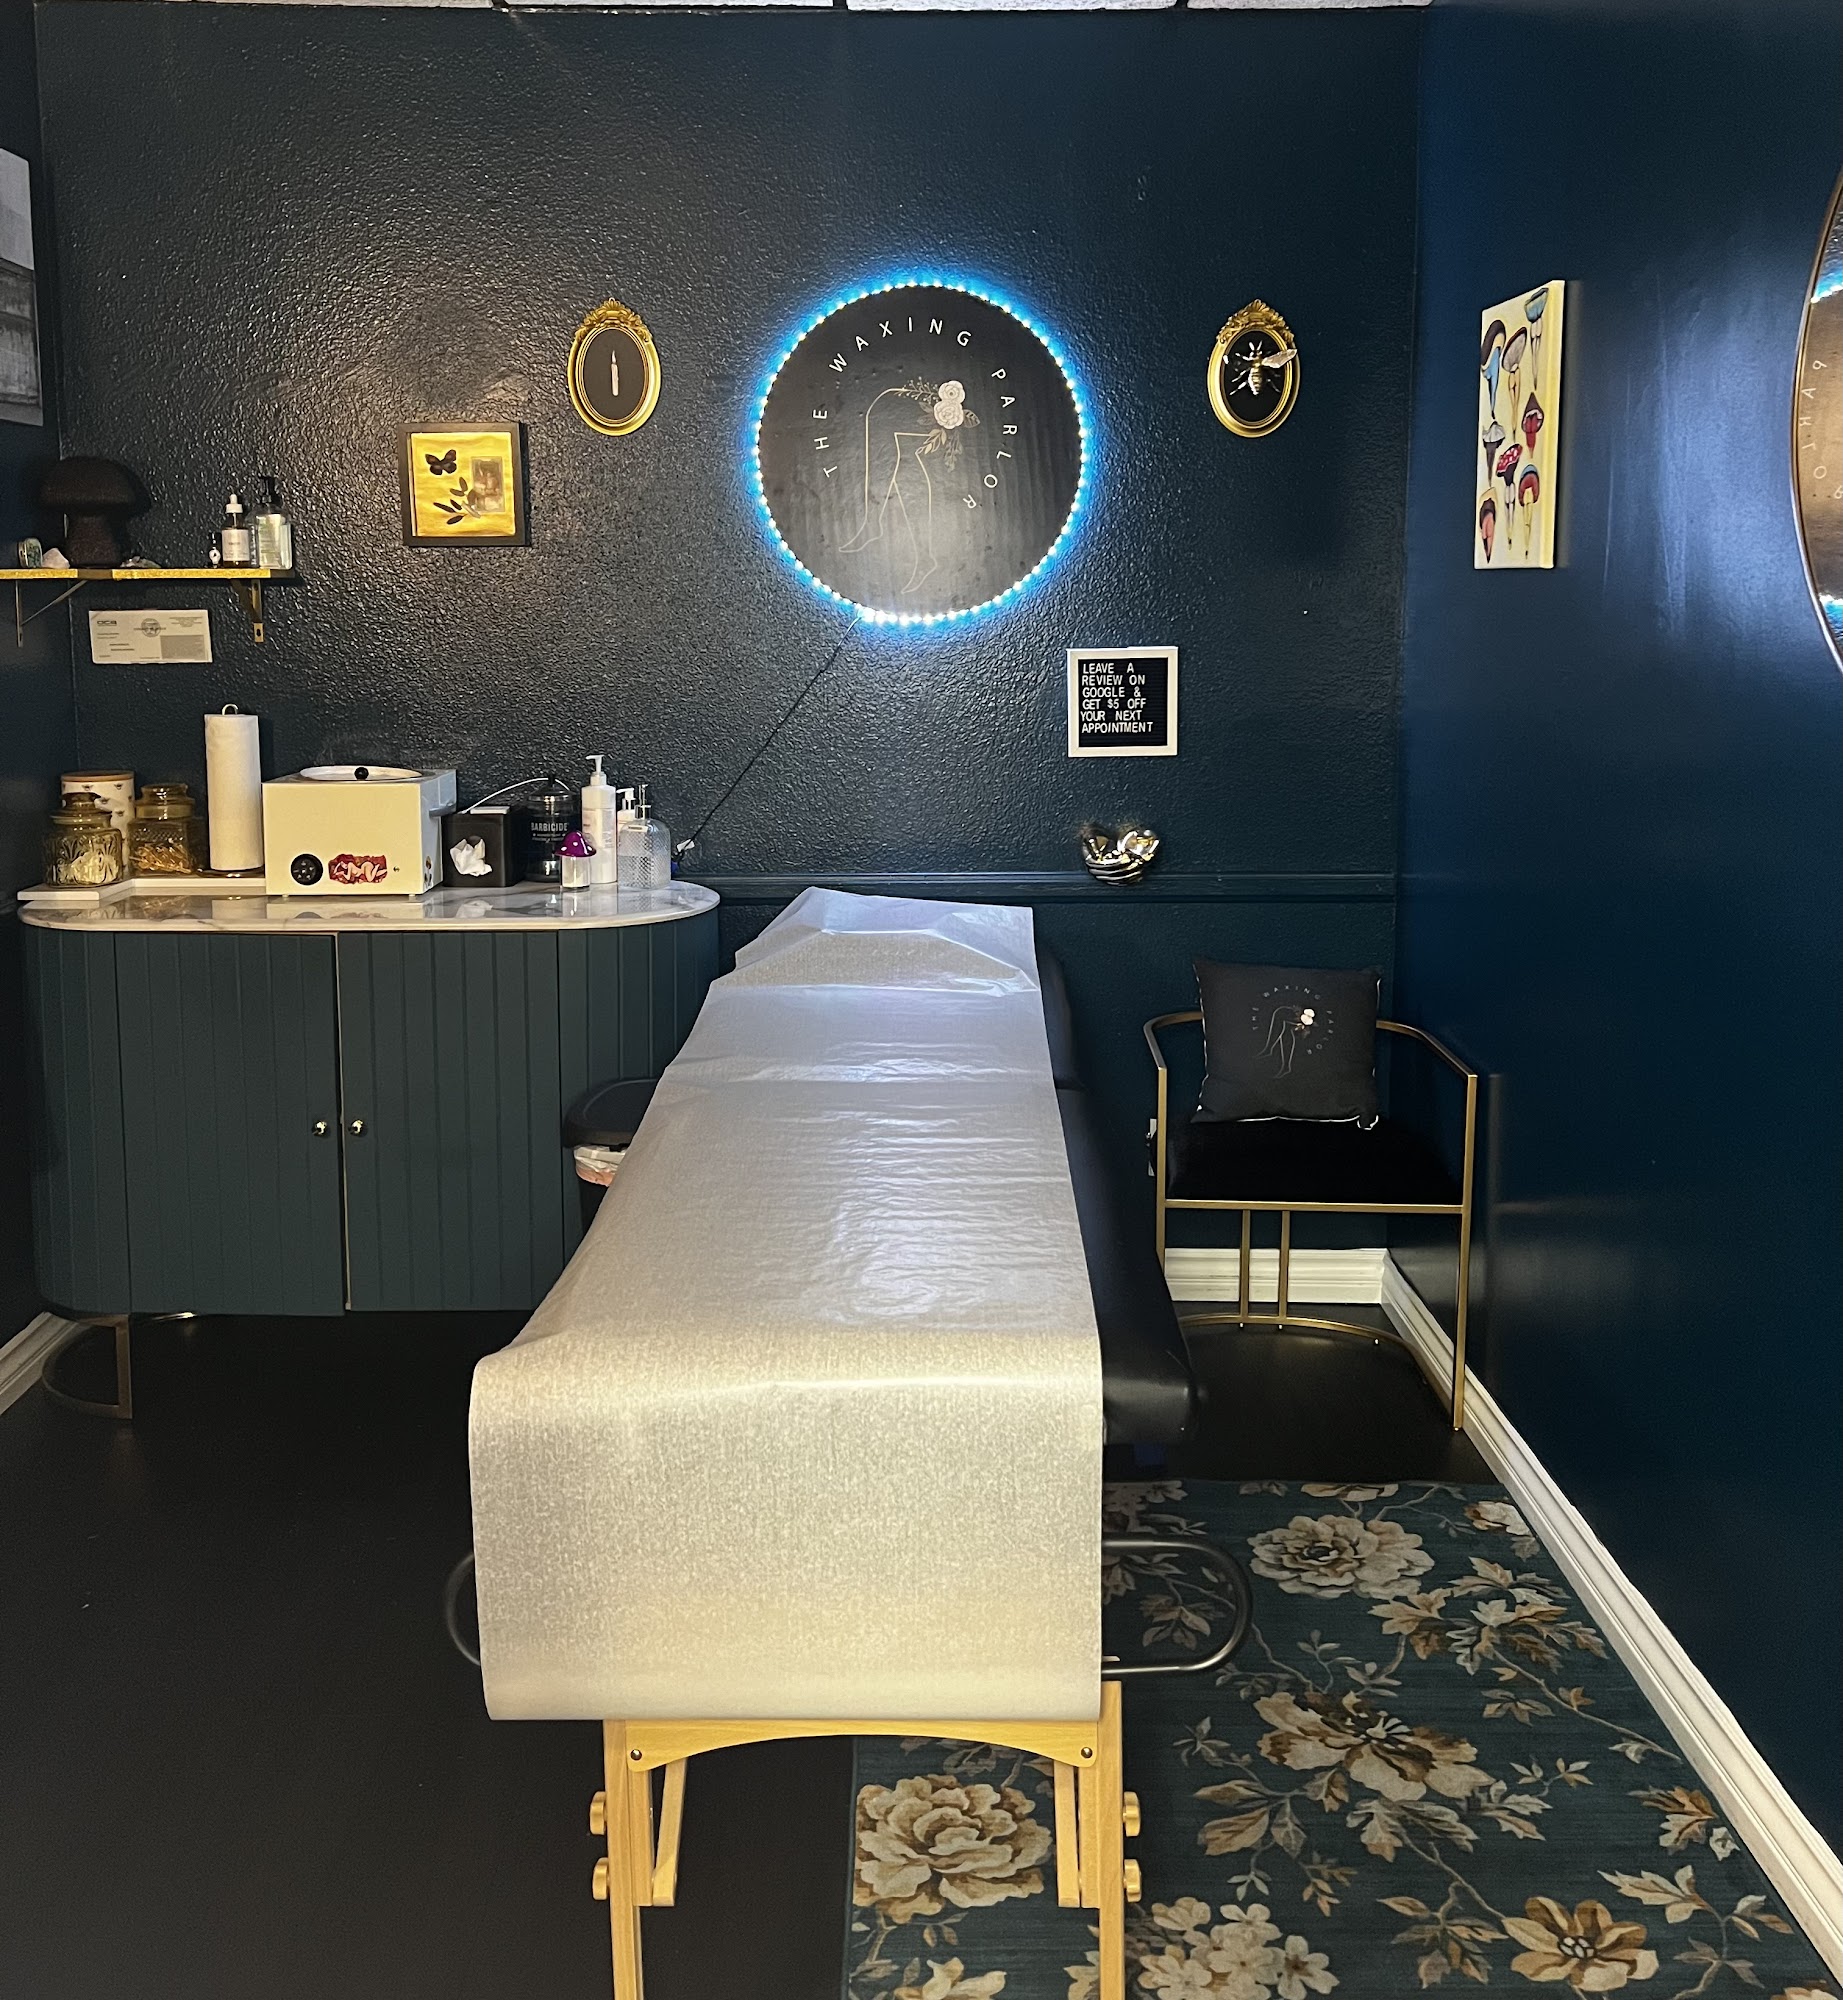 The Waxing Parlor